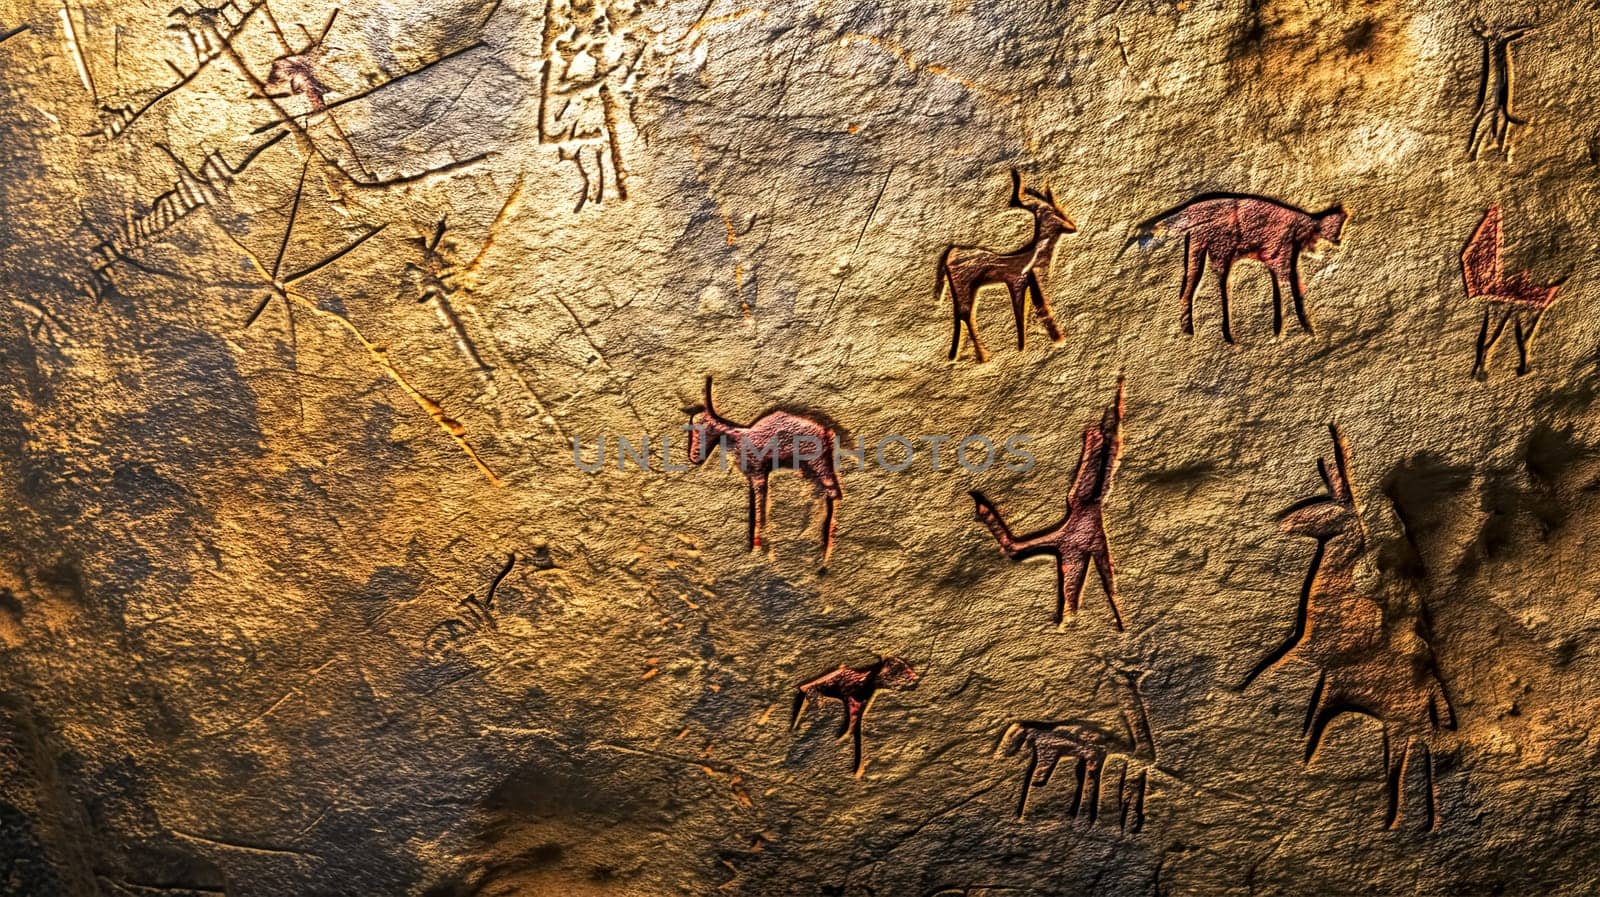 Ancient cave art depicting various animals and figures, etched onto a textured rock surface, illuminated to enhance the depth and detail of the primitive drawings by Edophoto